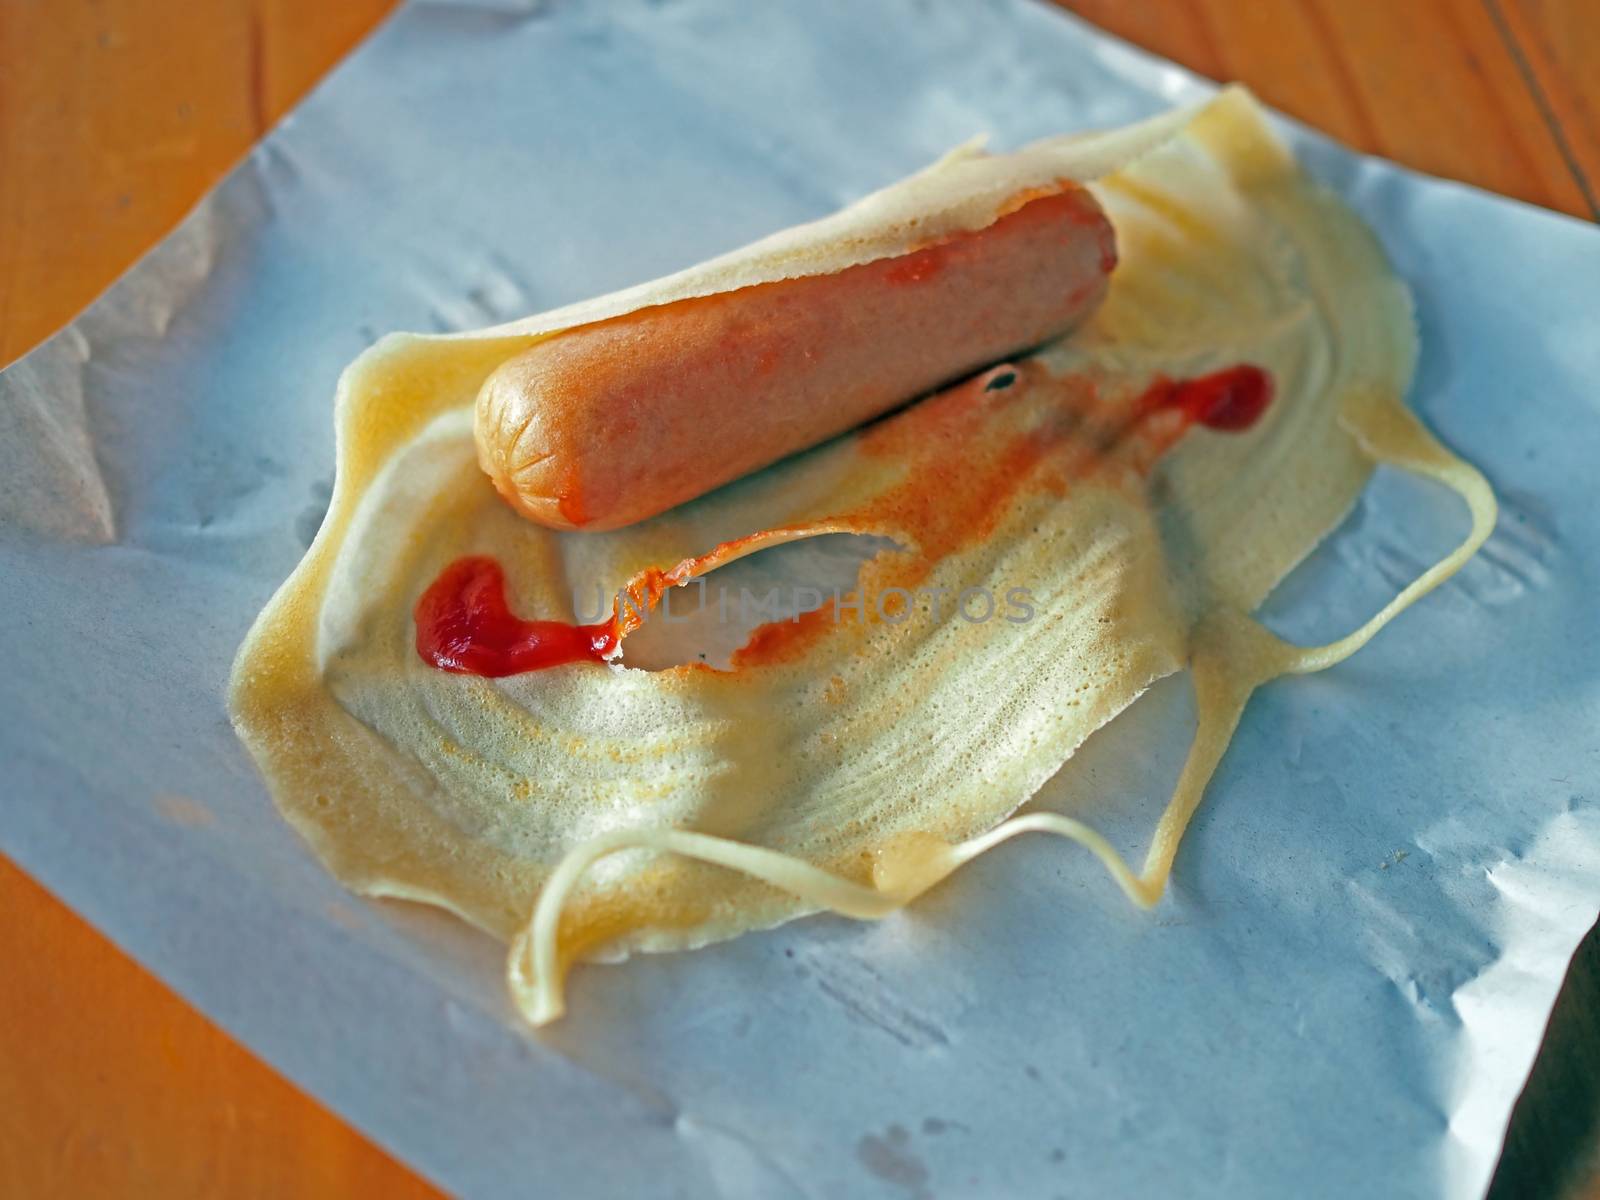 Hot Dog wrapped in bread topped with sauce on a paper-based floo by Unimages2527